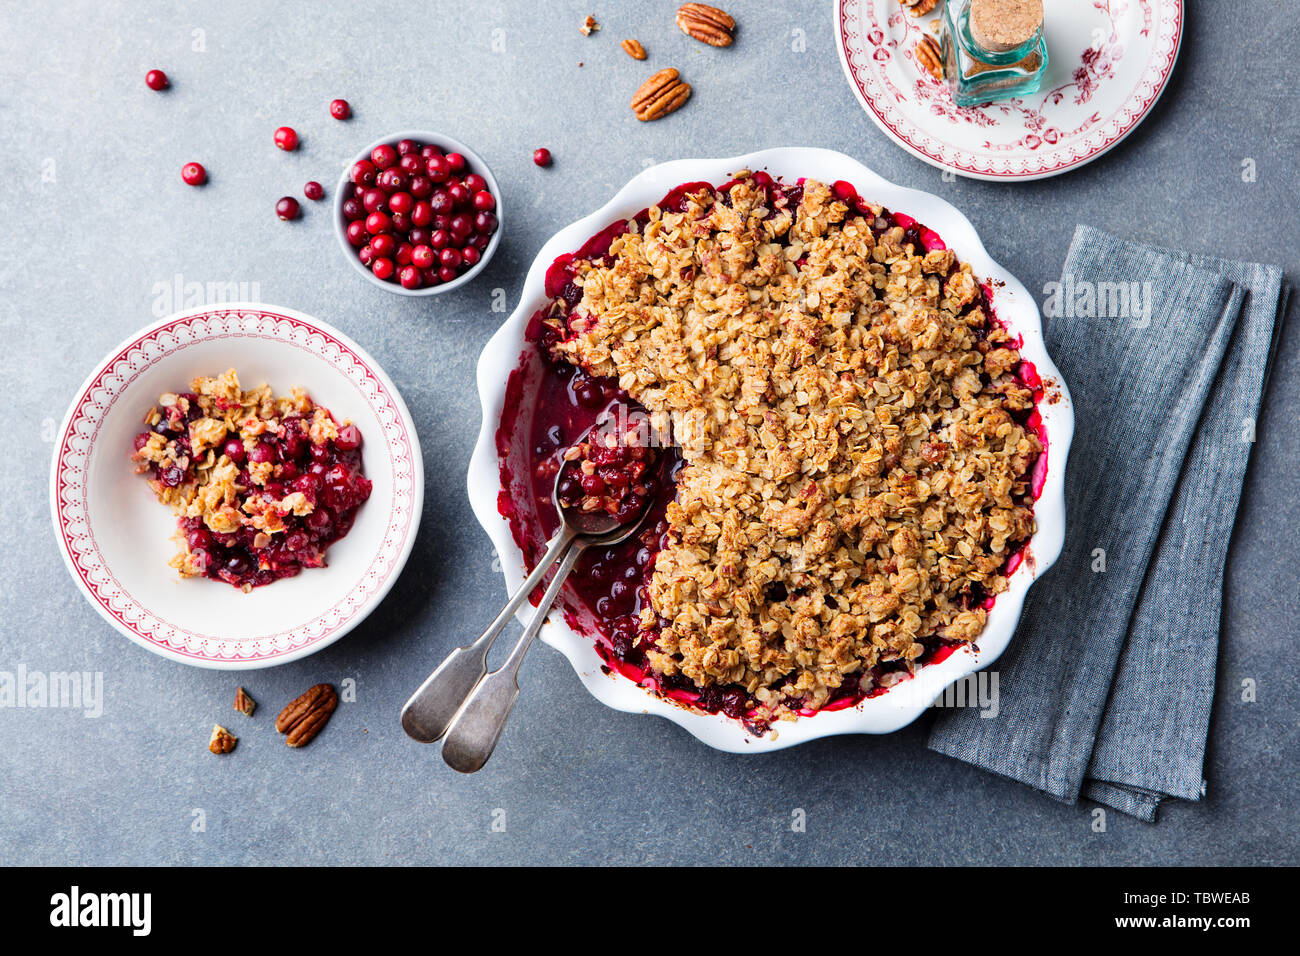 Cherry, red berry crumble in baking dish. Grey stone background. Top view. Stock Photo